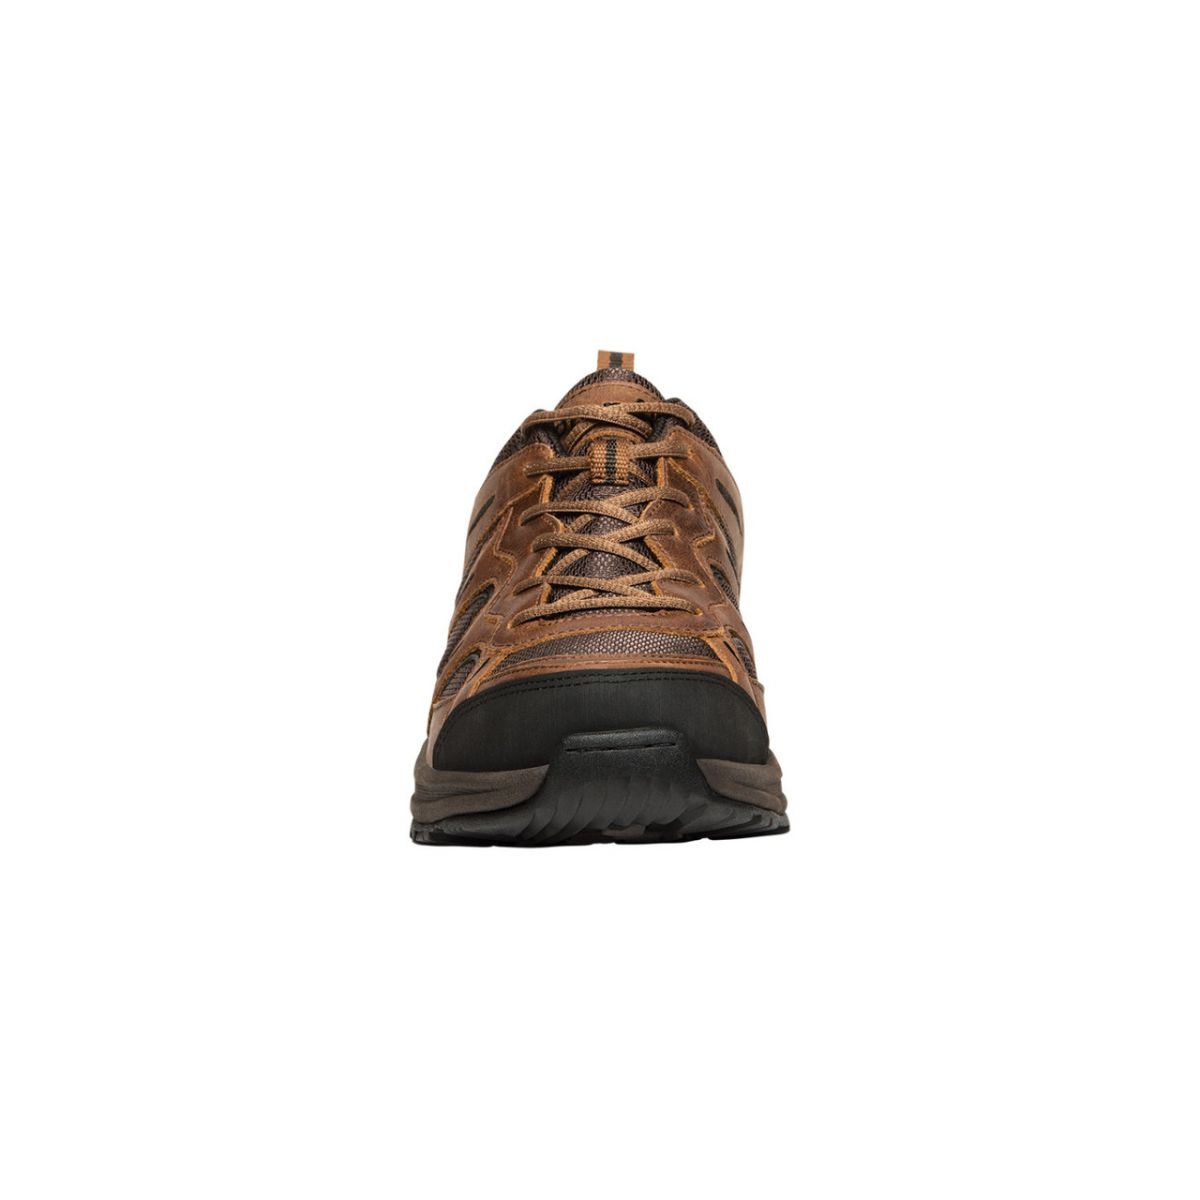 Propet Men's Connelly Hiking Shoe Brown - M5503BR BROWN - BROWN, 11.5-3E